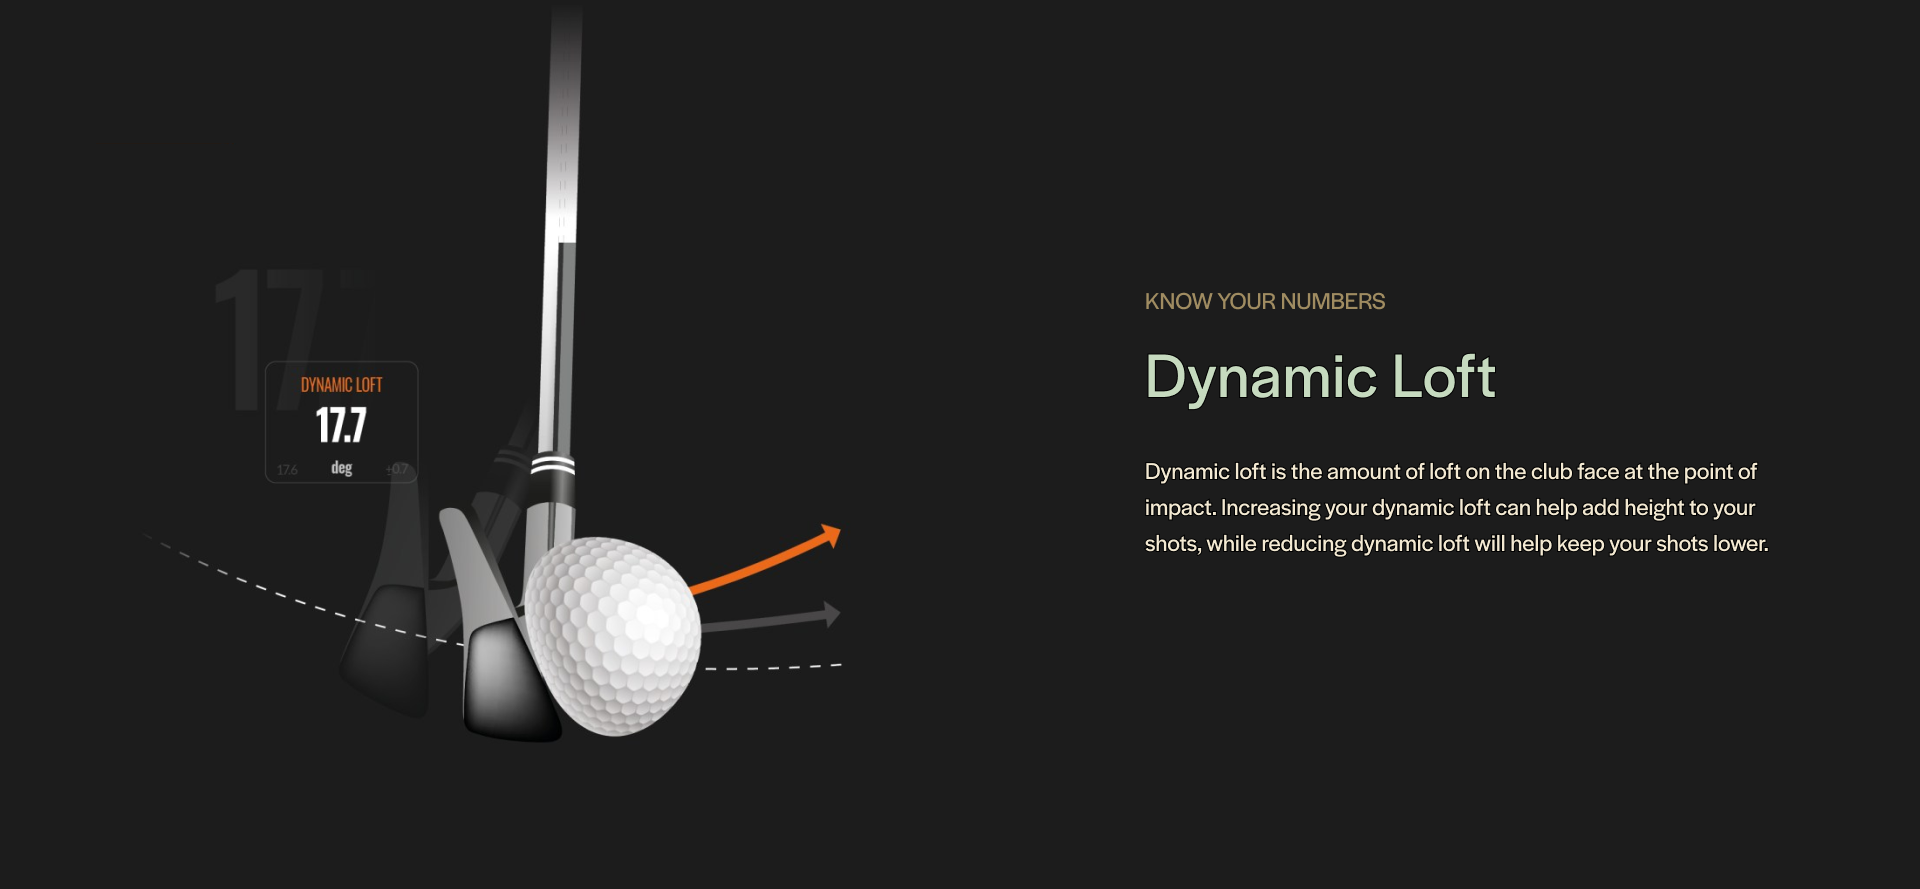 Dynamic loft is the amount of loft on the club face at the point of impact. Increasing your dynamic loft can help add height to your shots, while reducing it will help keep your shots lower.